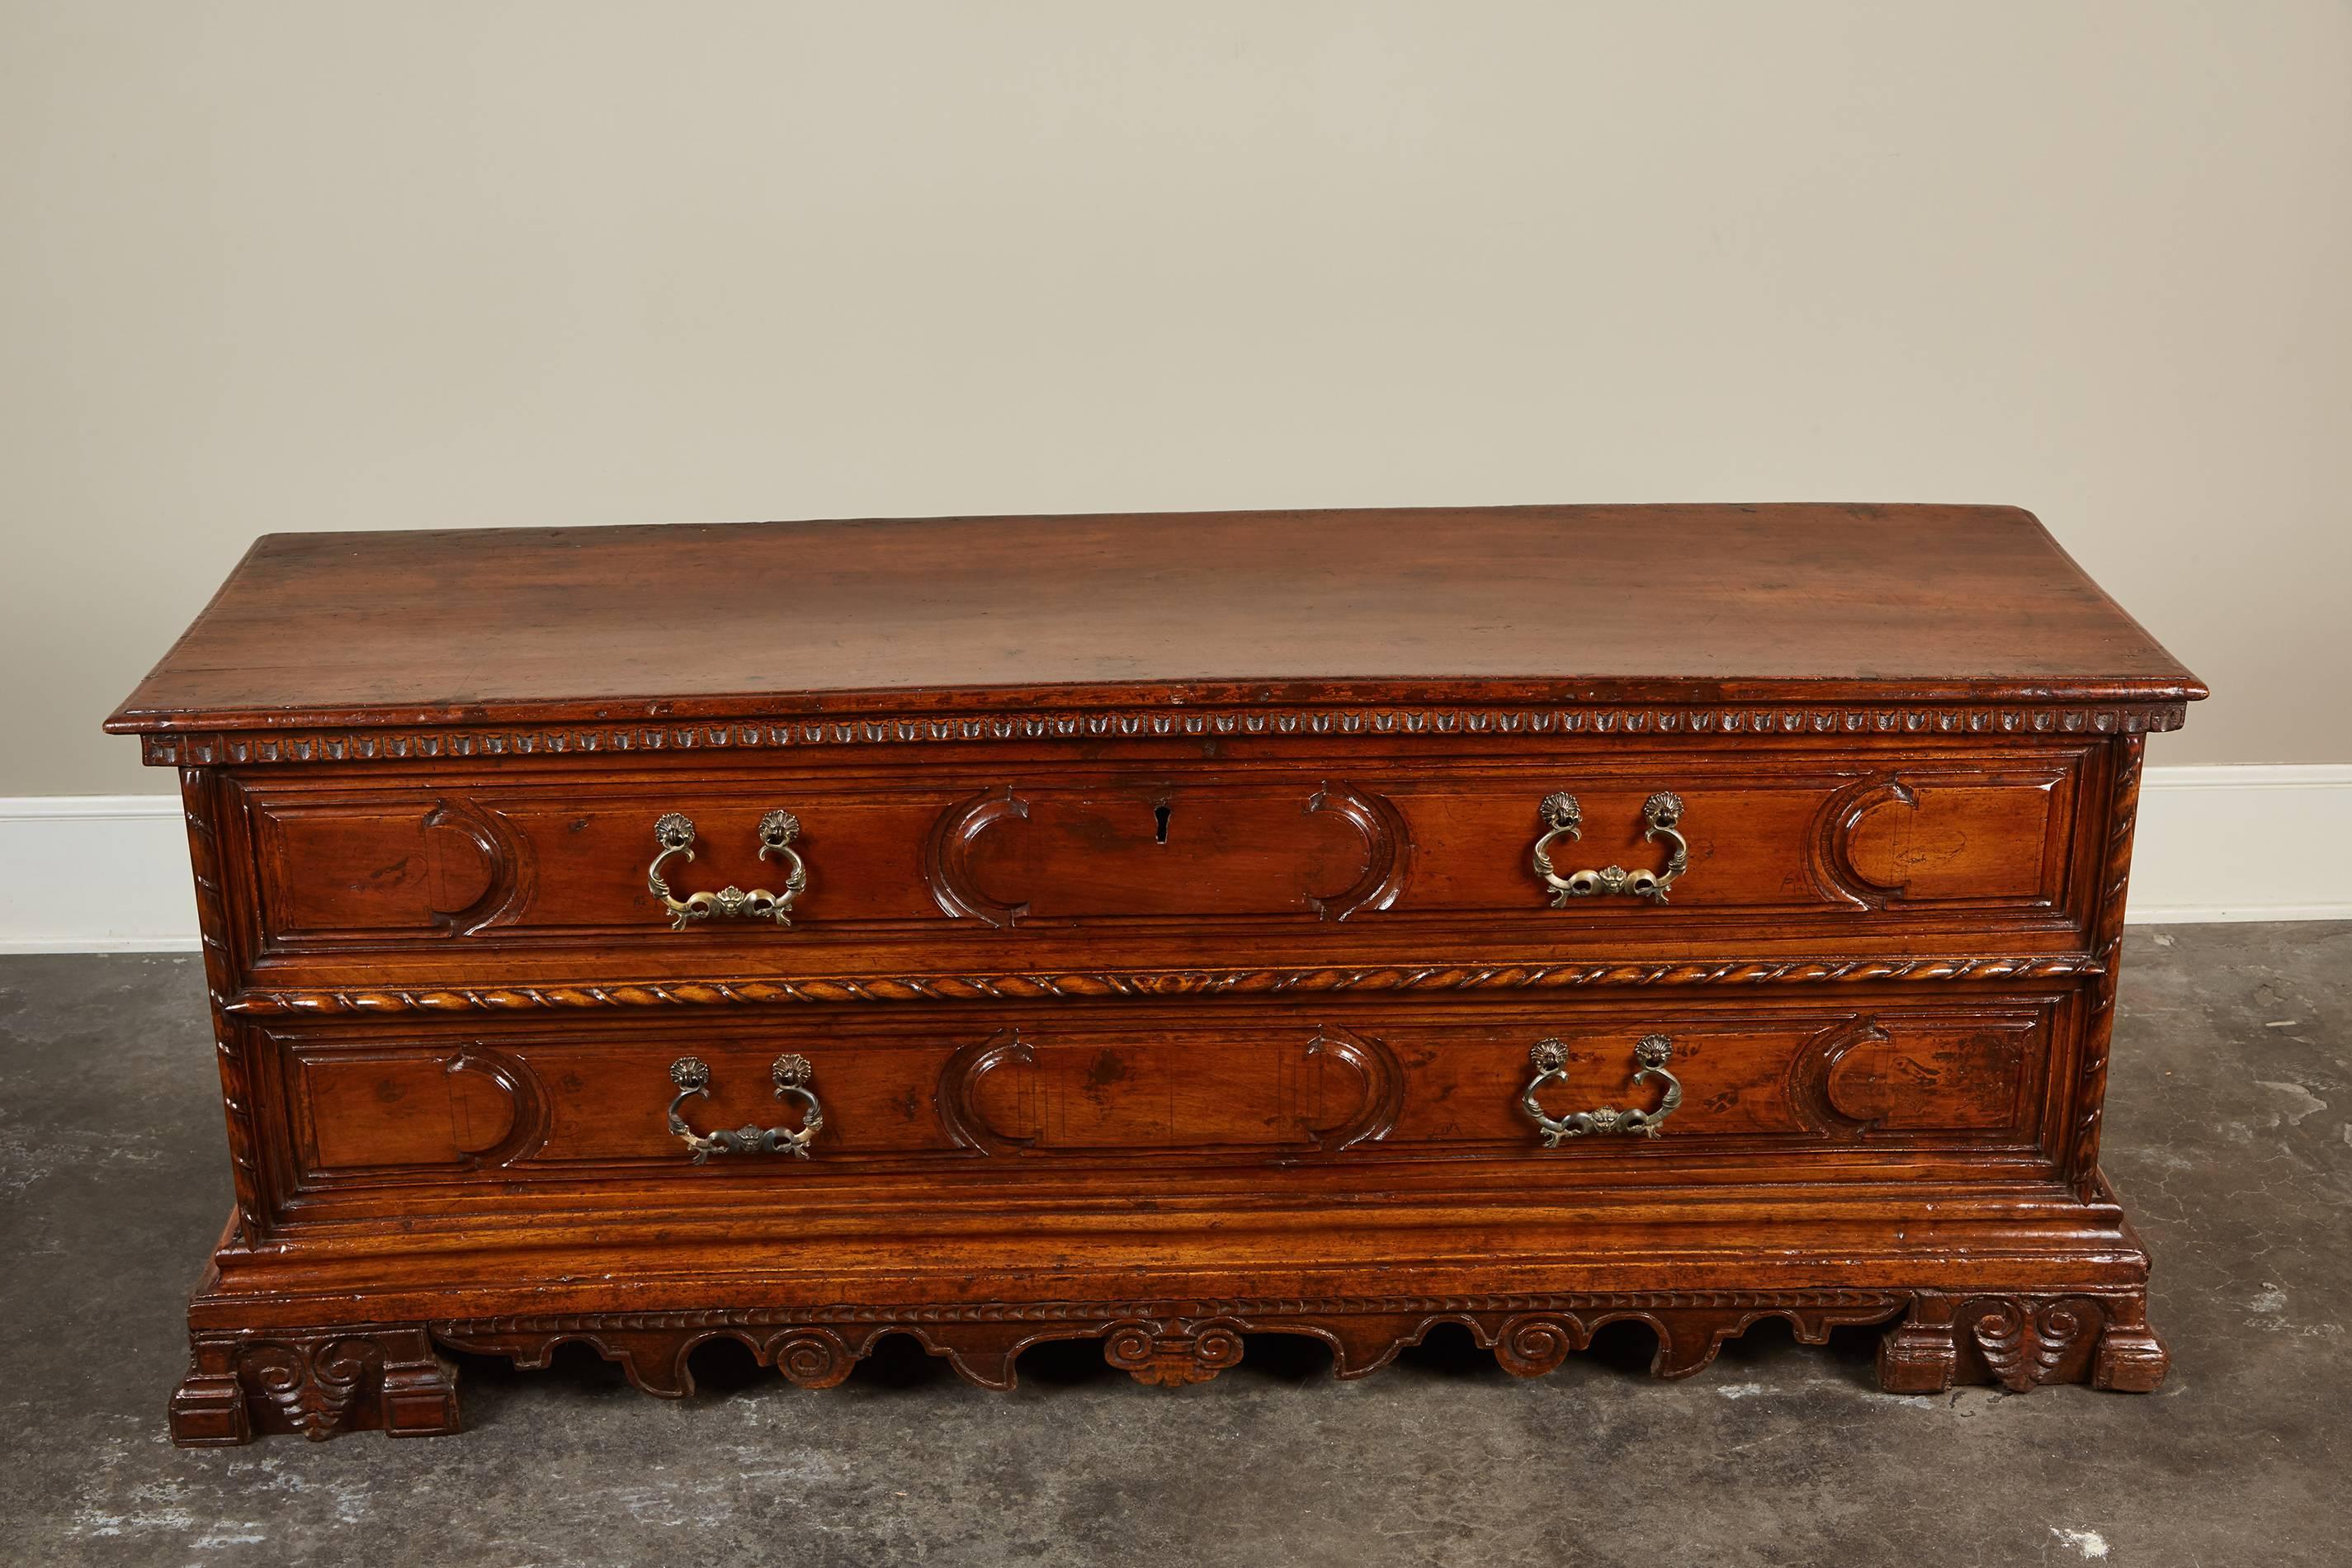 An early 19th century Italian walnut cassone with beautifully carved details with faux chest fronts. The cassone’s interior is covered in paper and has one compartment.